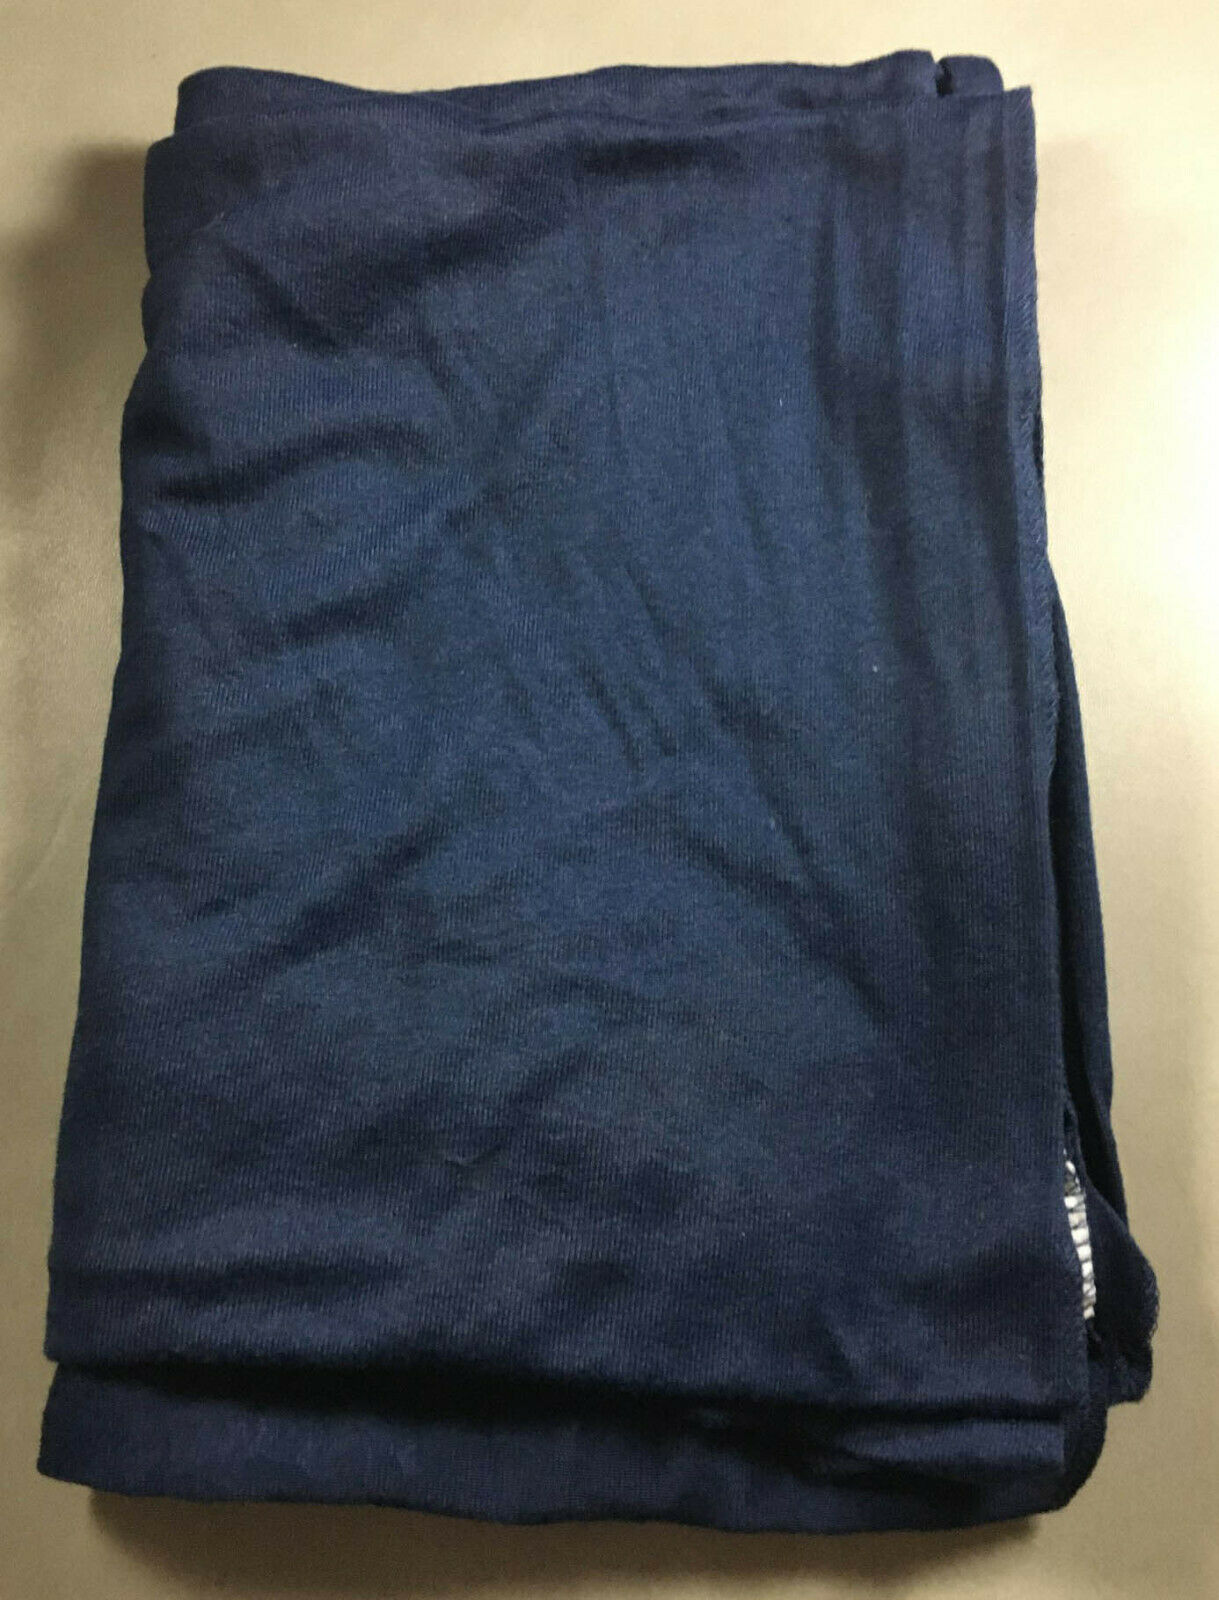 Us Airways Blue Polyester In Flight Blanket 52”x36” With Property Tag